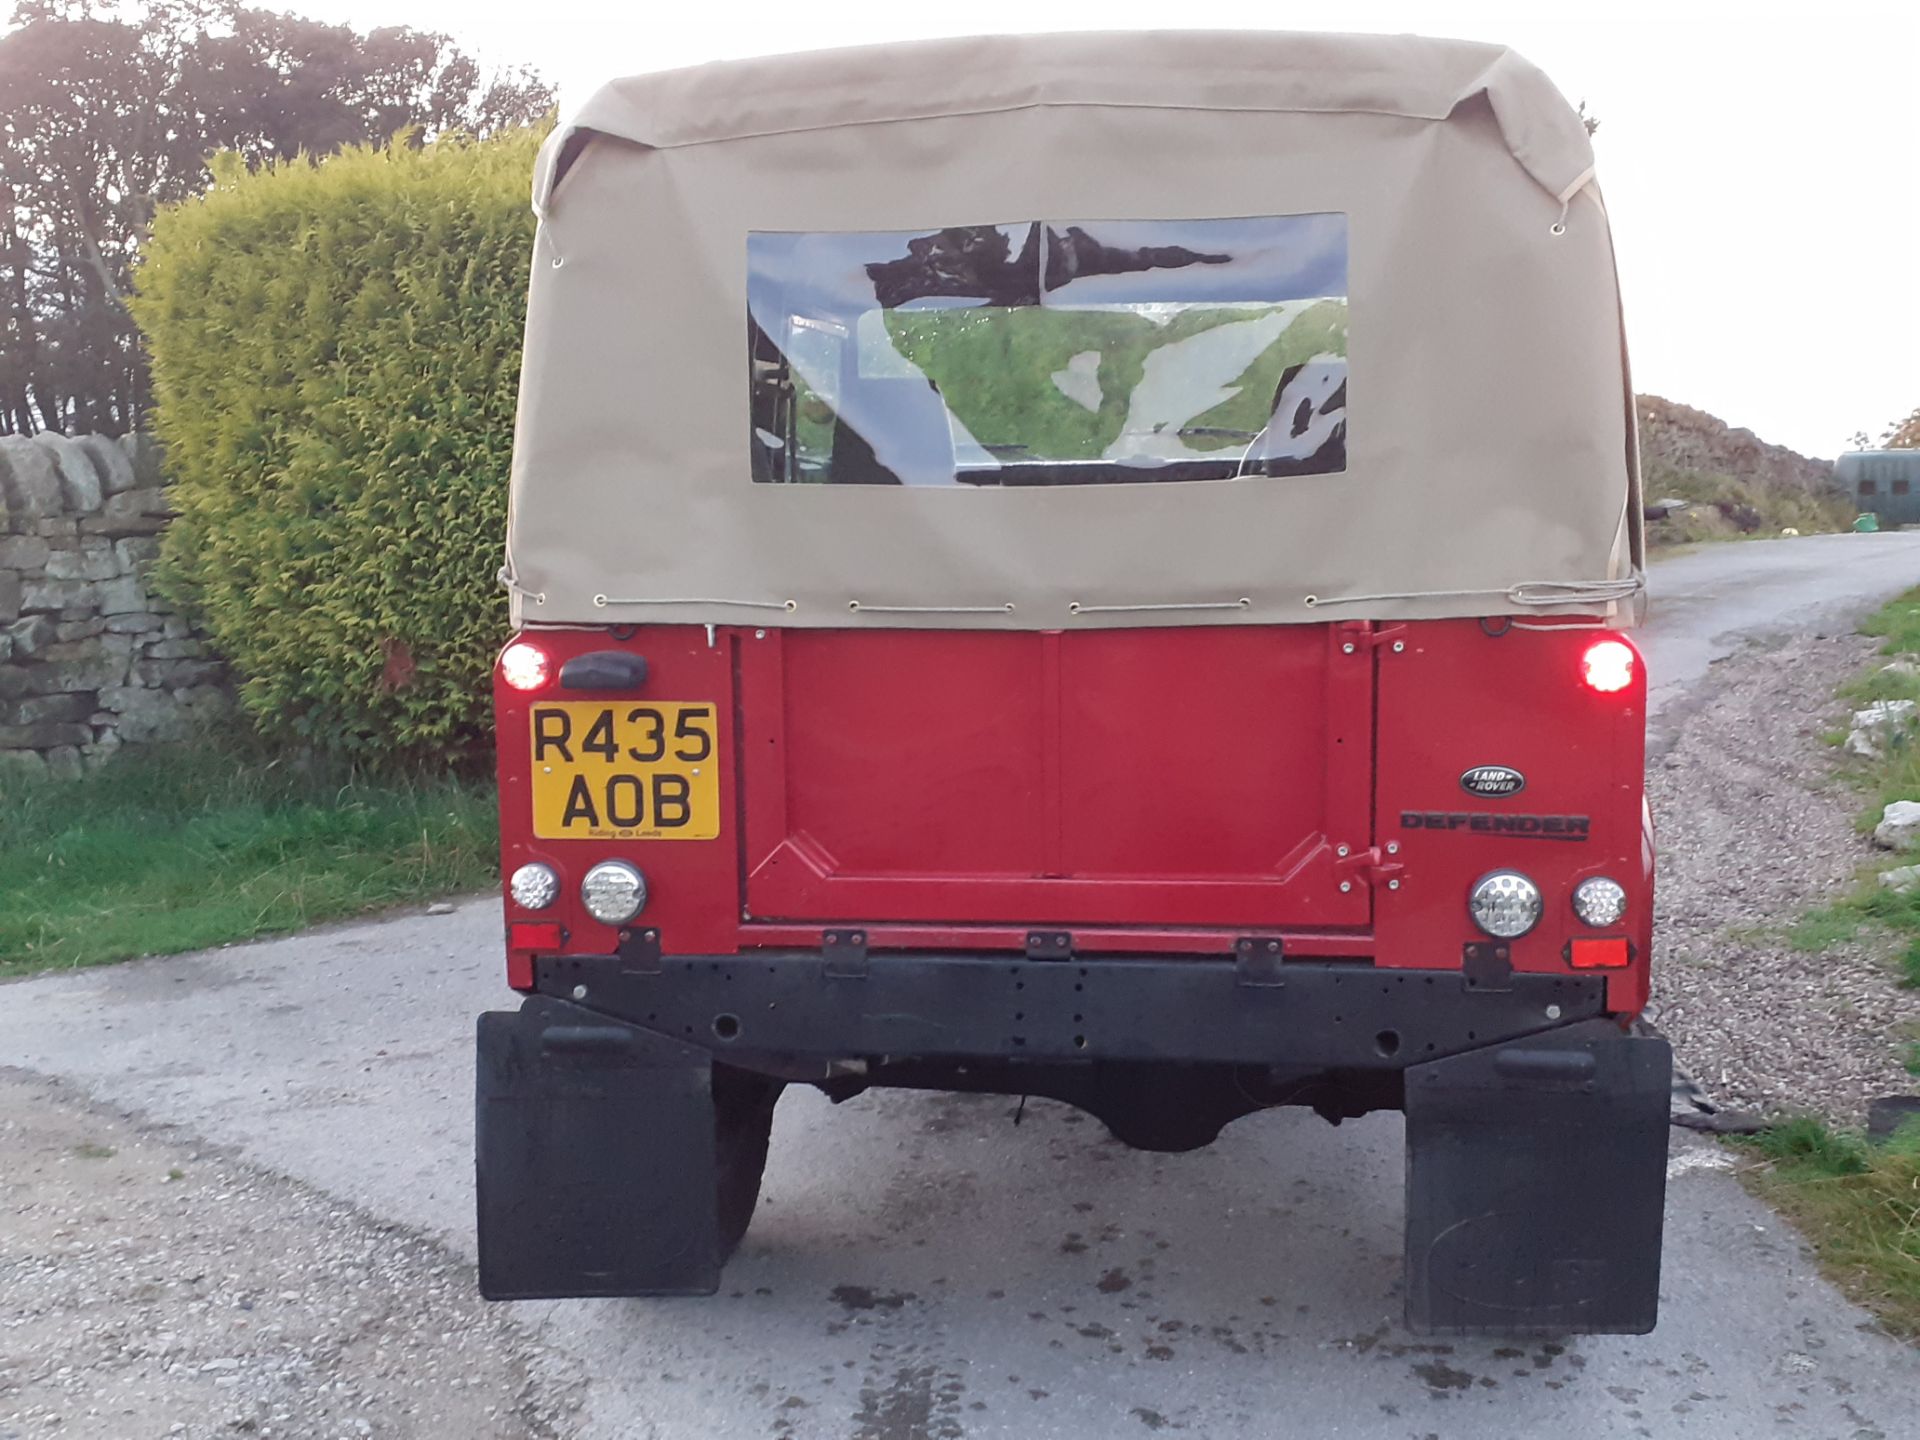 1998/R REG LAND ROVER DEFENDER 90 CSW TDI 95 RED CONVERTIBLE 6 SEATER, SHOWING 2 FORMER KEEPERS - Image 7 of 9